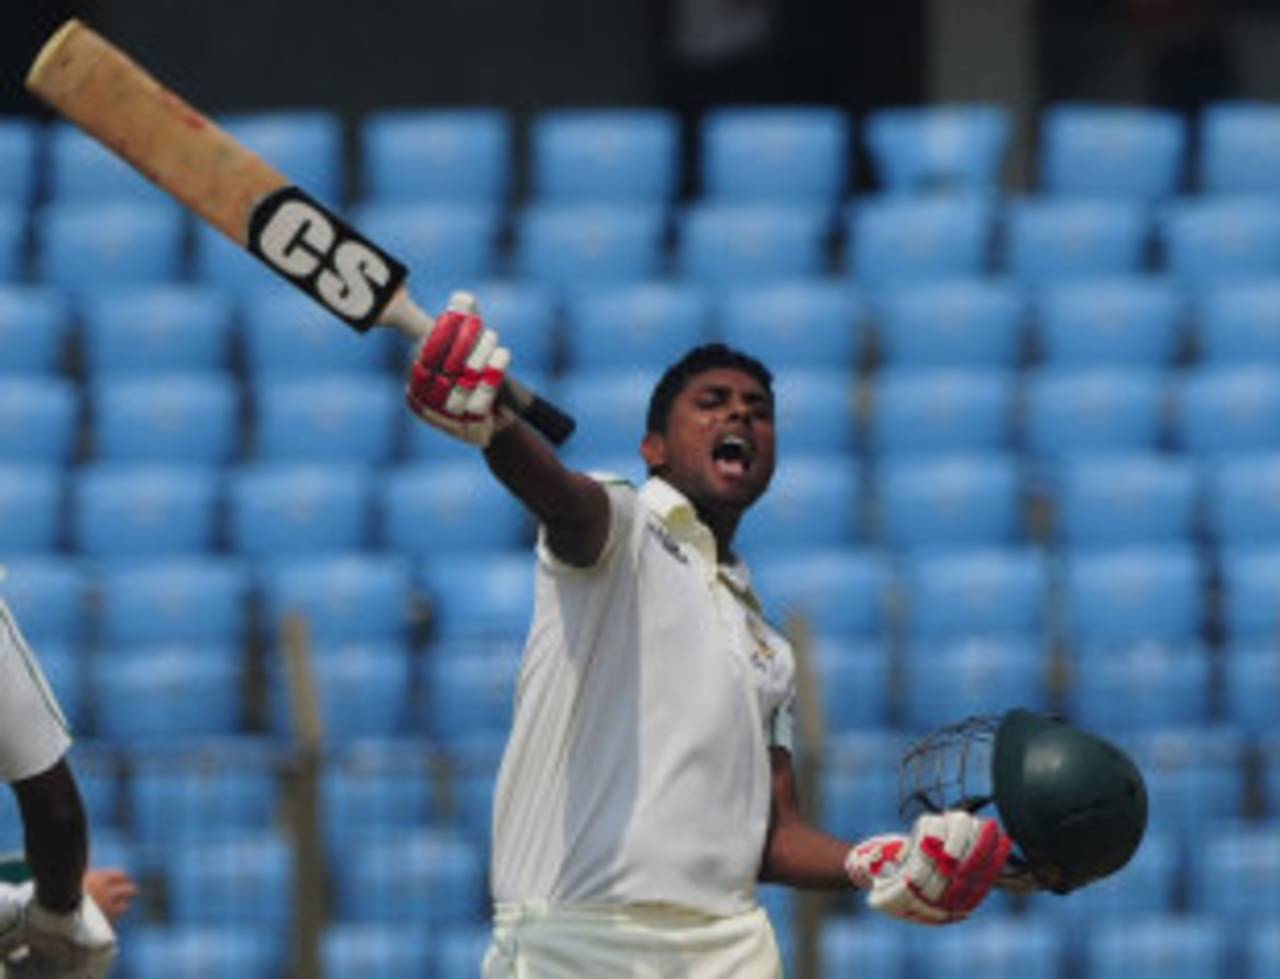 Gazi's hundred came off 159 balls and included 10 fours and three sixes, Bangladesh v New Zealand, 1st Test, 4th day, Chittagong, October 12, 2013